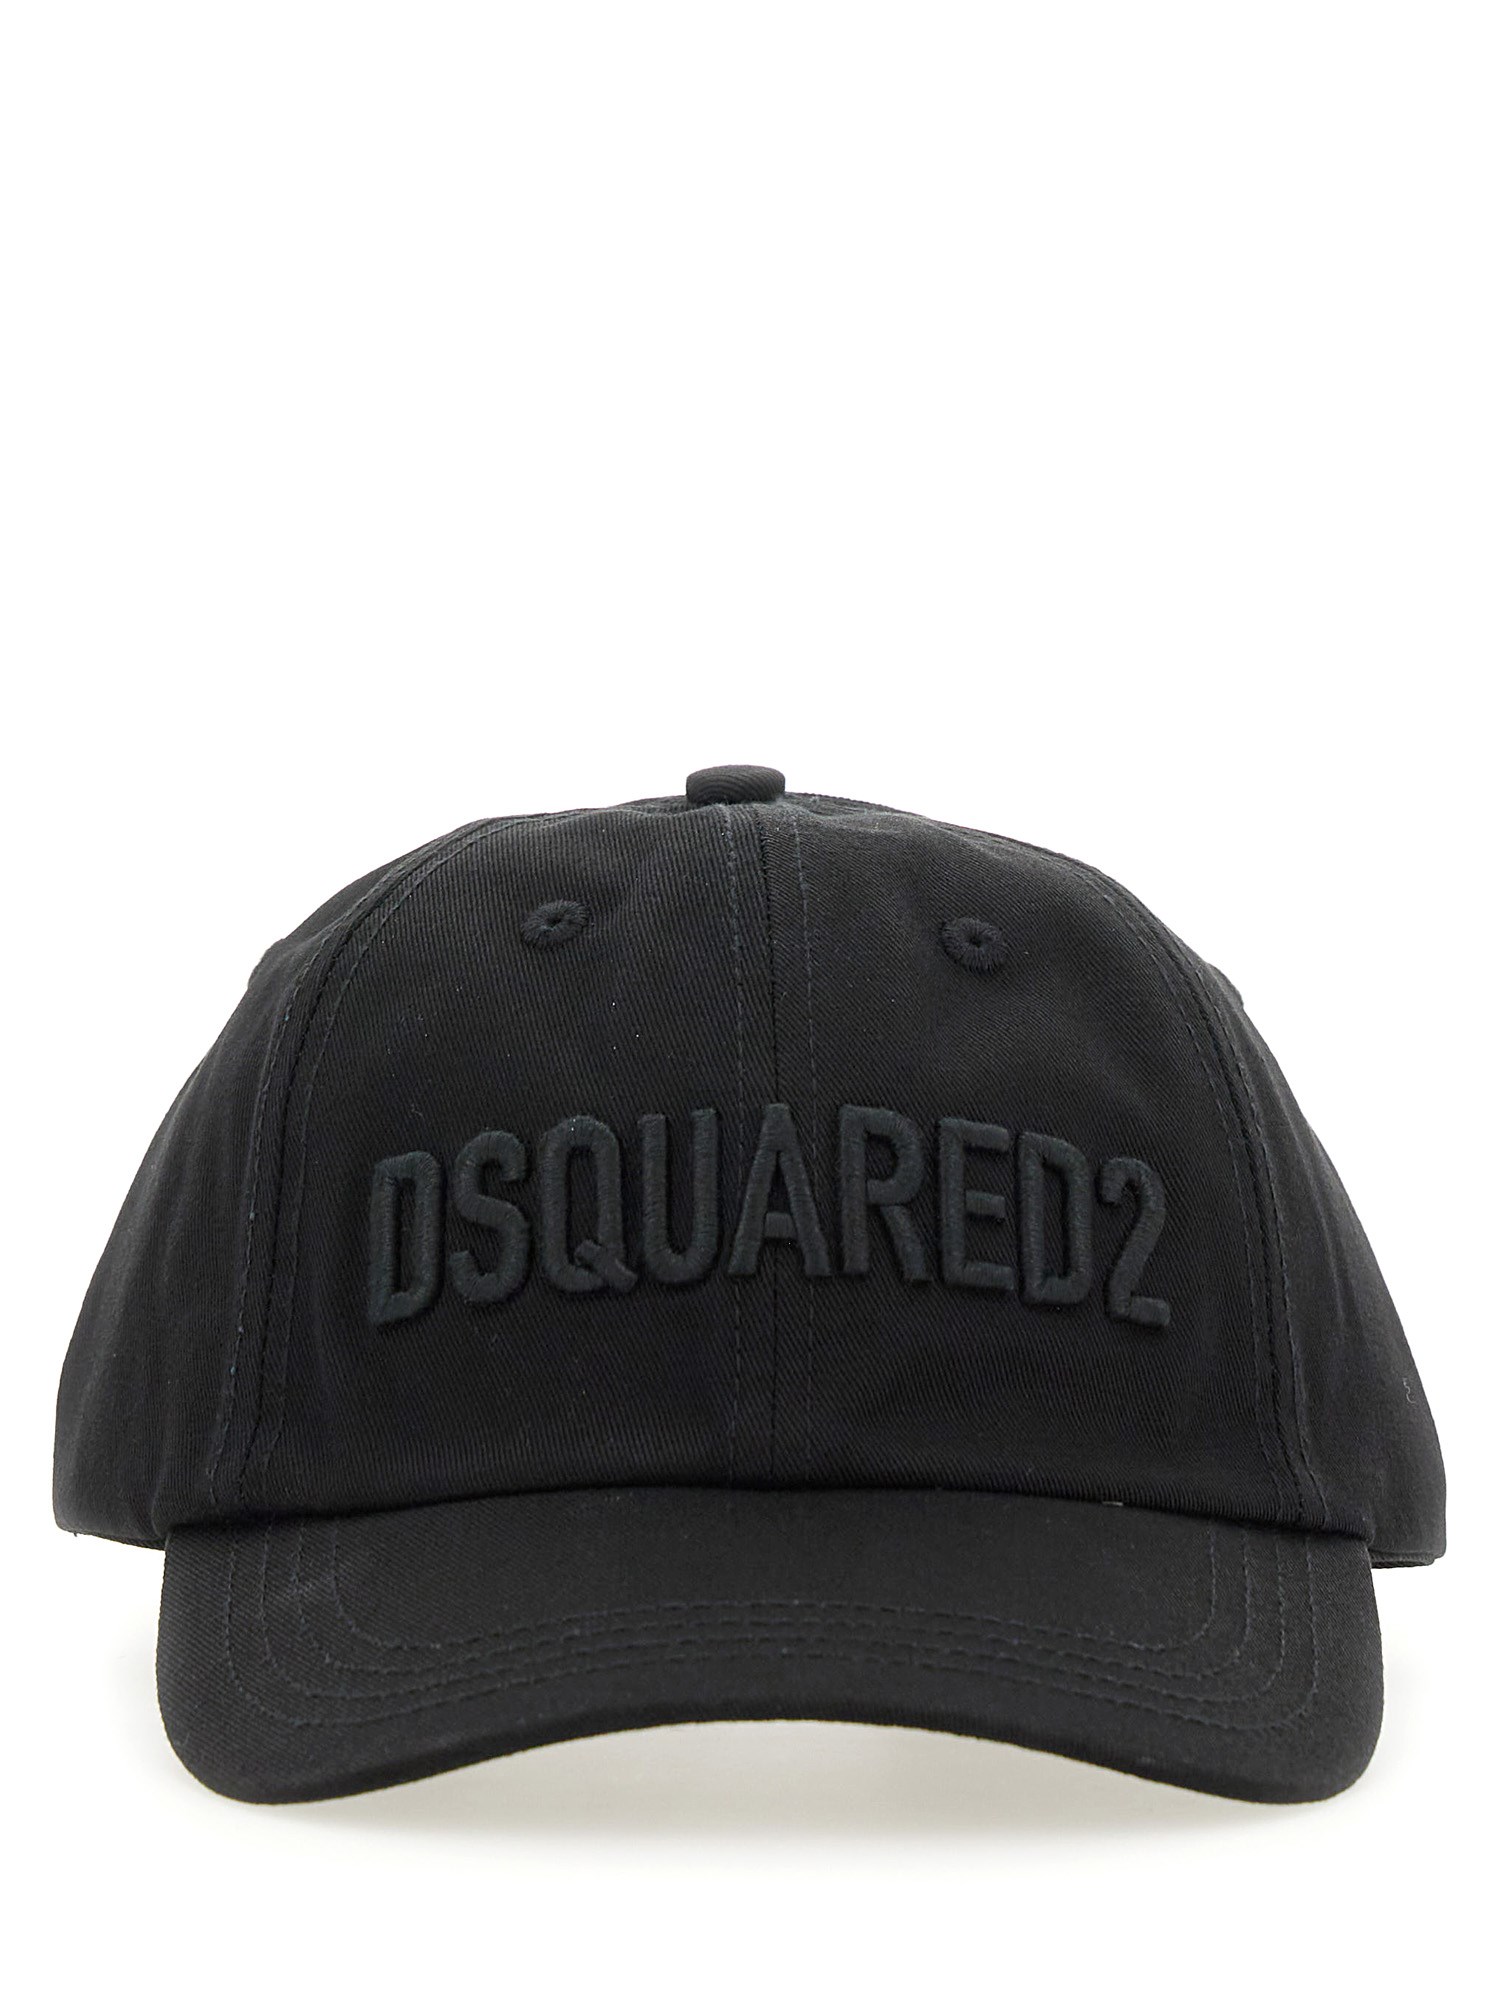 dsquared dsquared baseball hat with logo